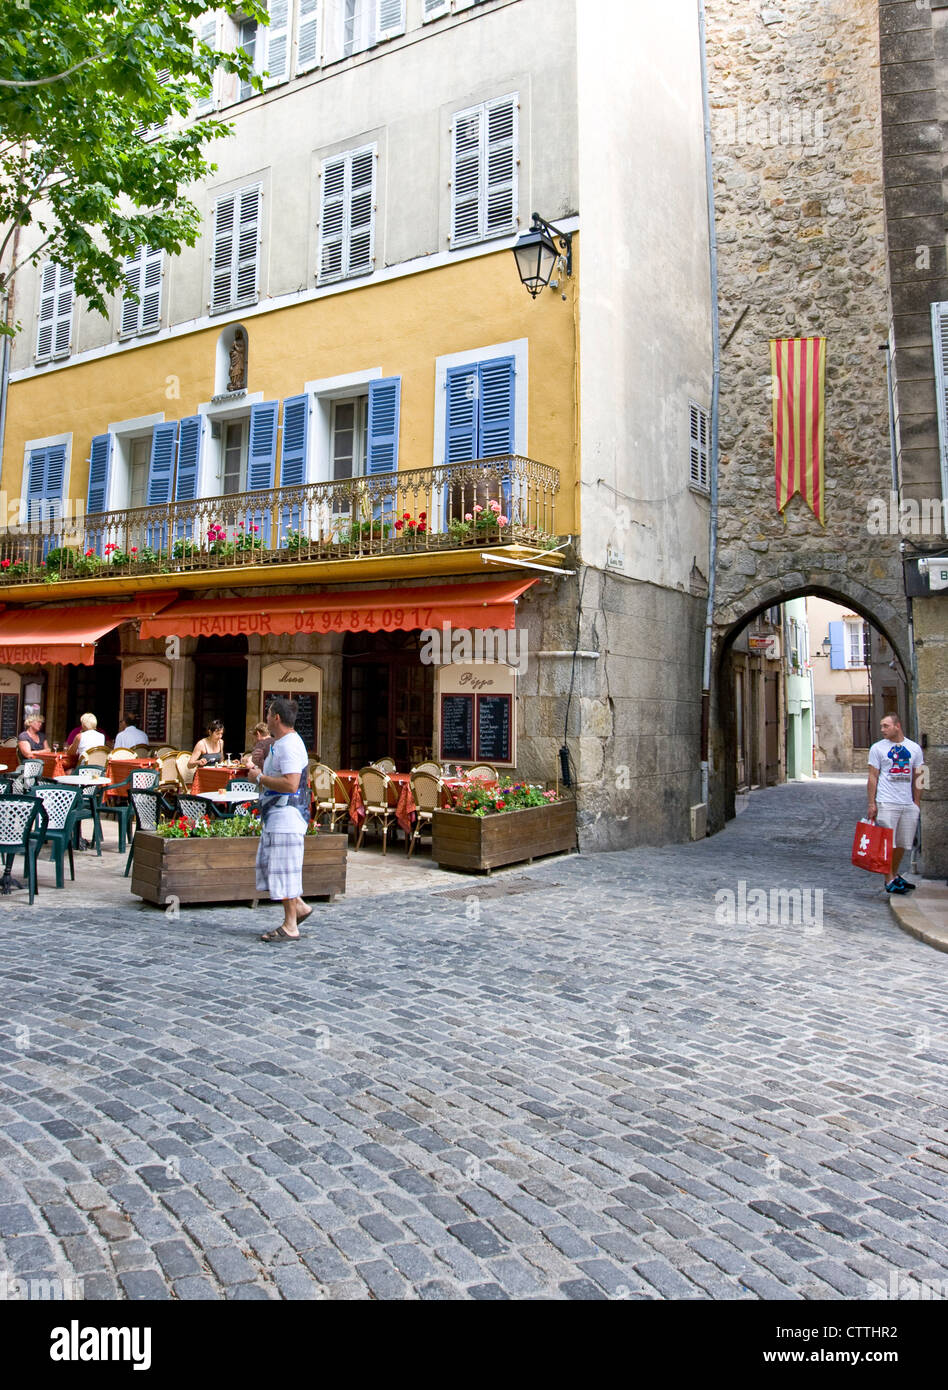 Cafe culture in ancient walled town of Bargemon Var Provence France Europe Stock Photo